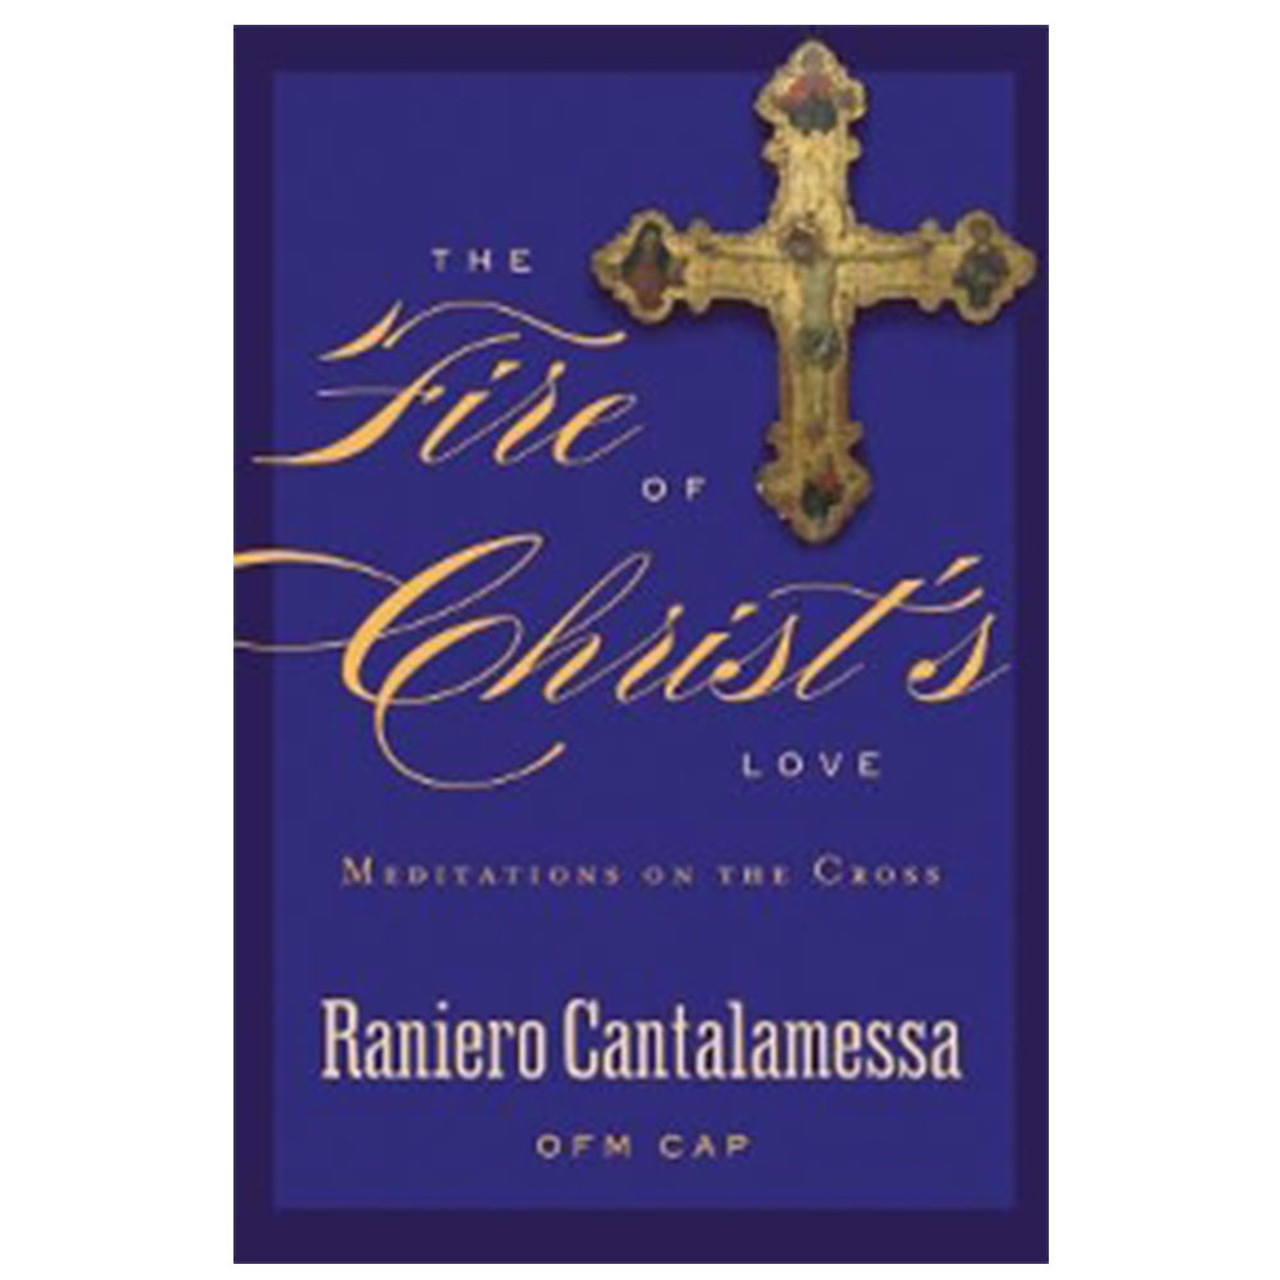 Fire of Christ's Love: Meditations on the Cross